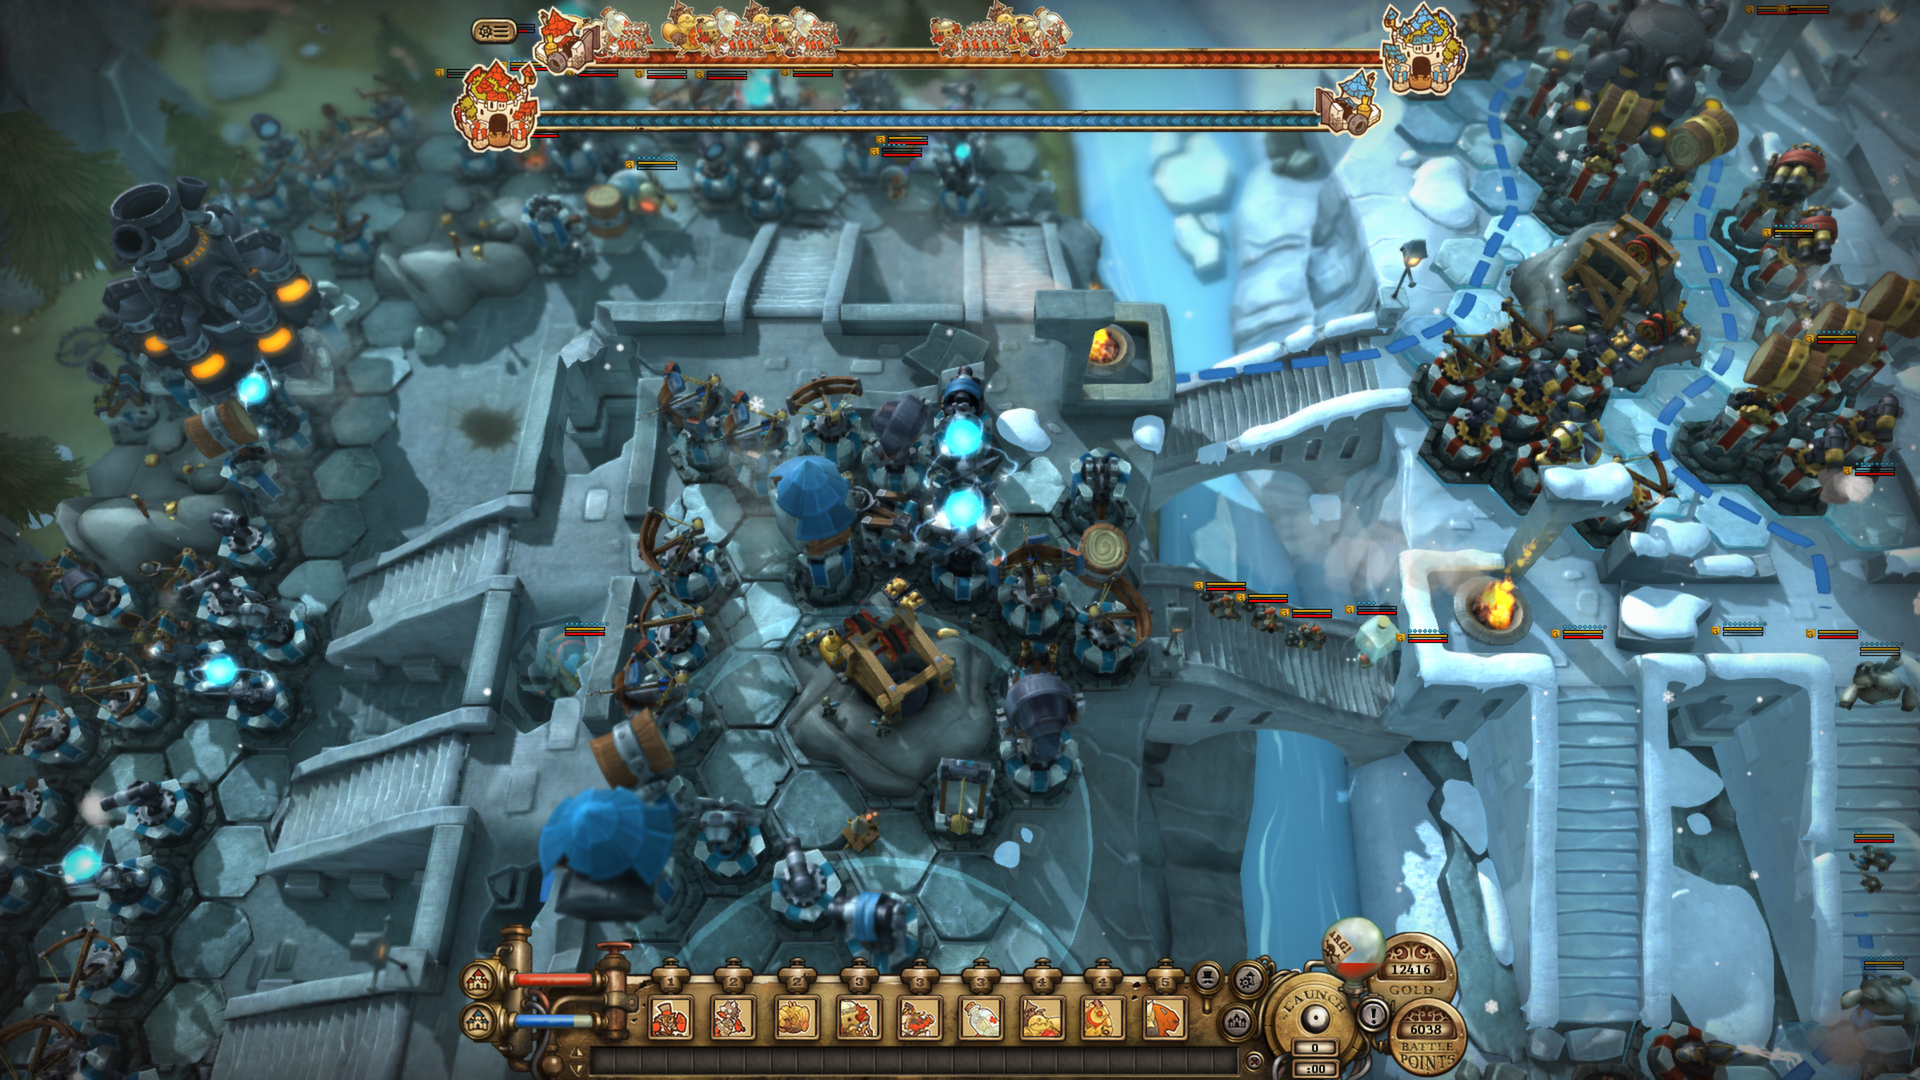 Screenshot of a classic Tower Defense game. Game shown: Tower Defense